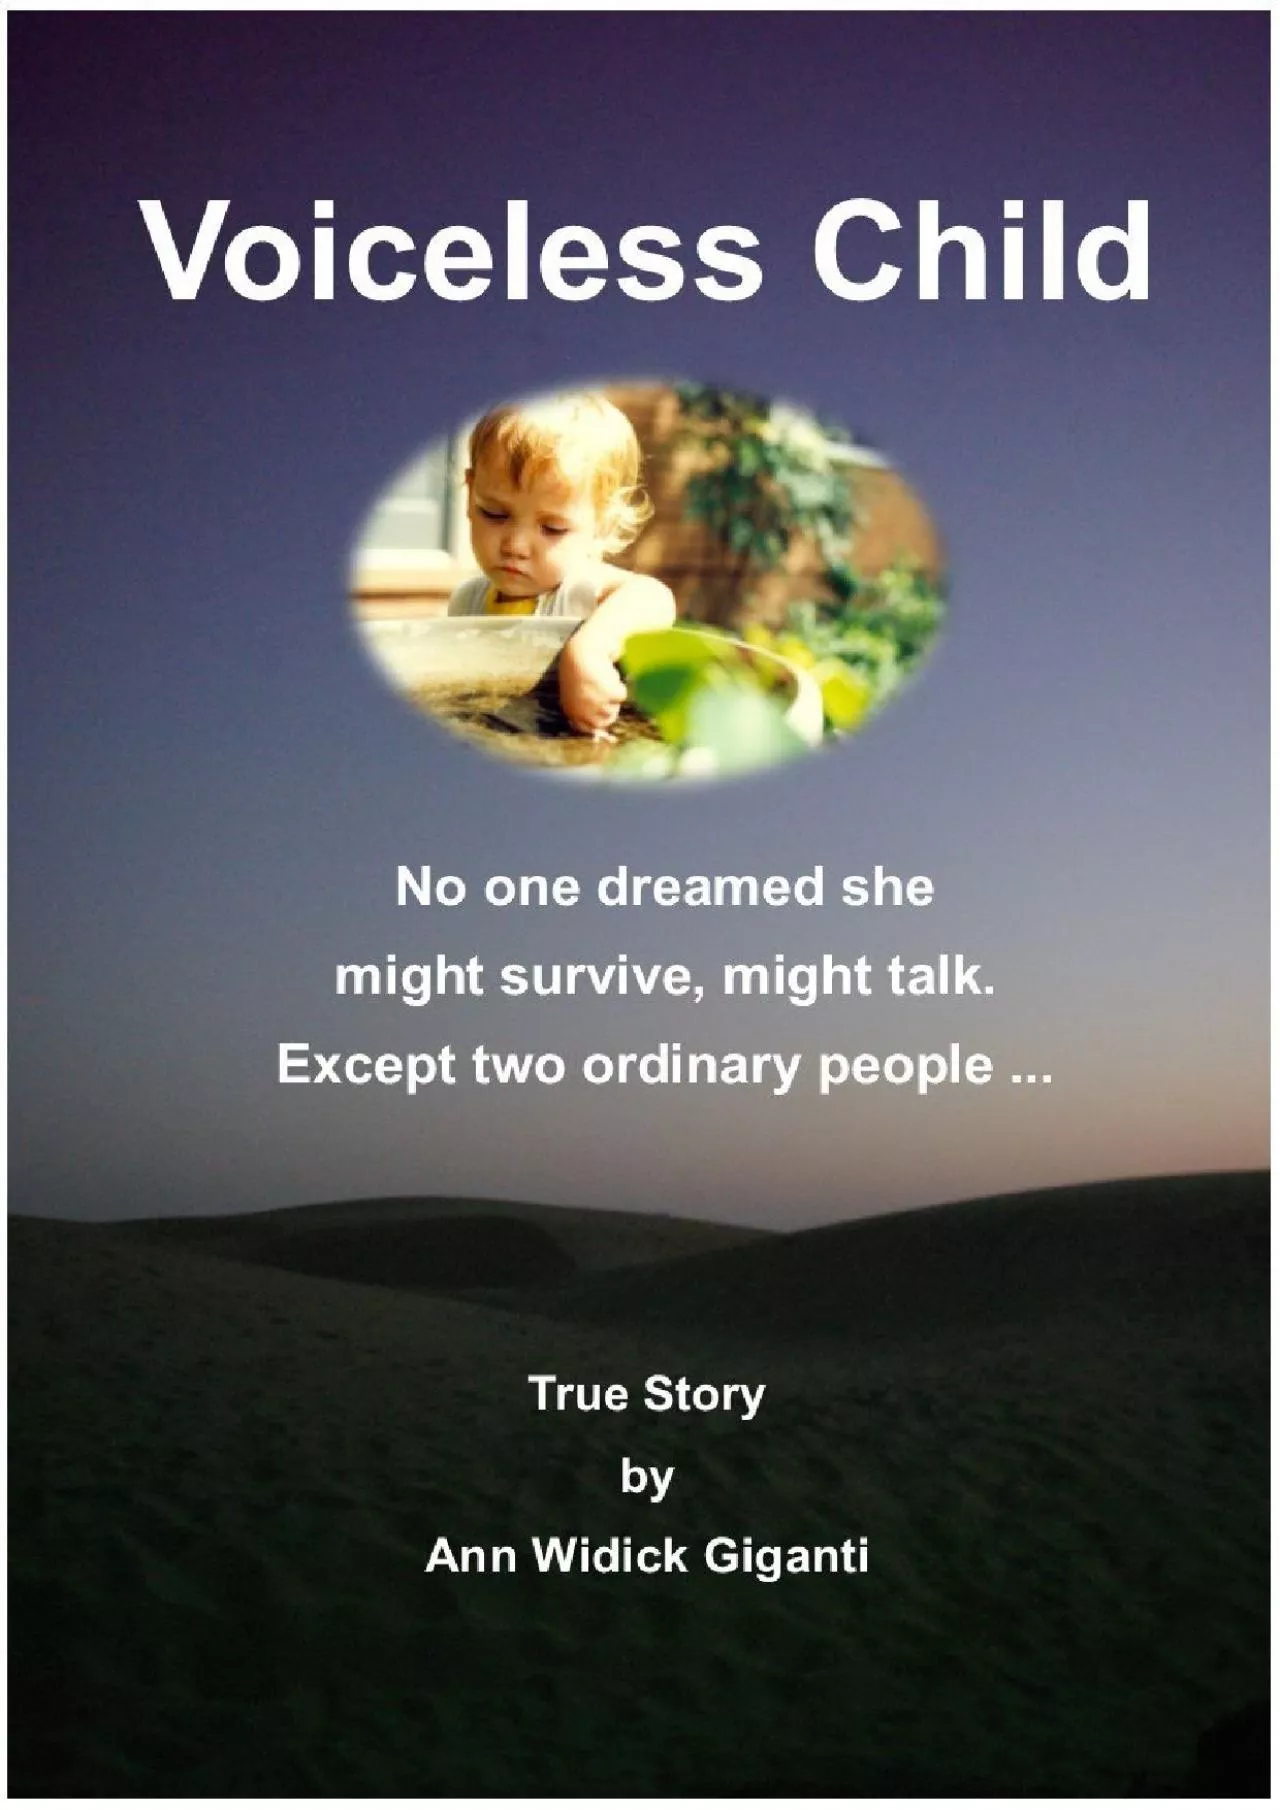 (BOOK)-Voiceless Child: No one dreamed she might survive, might talk. Except two ordinary